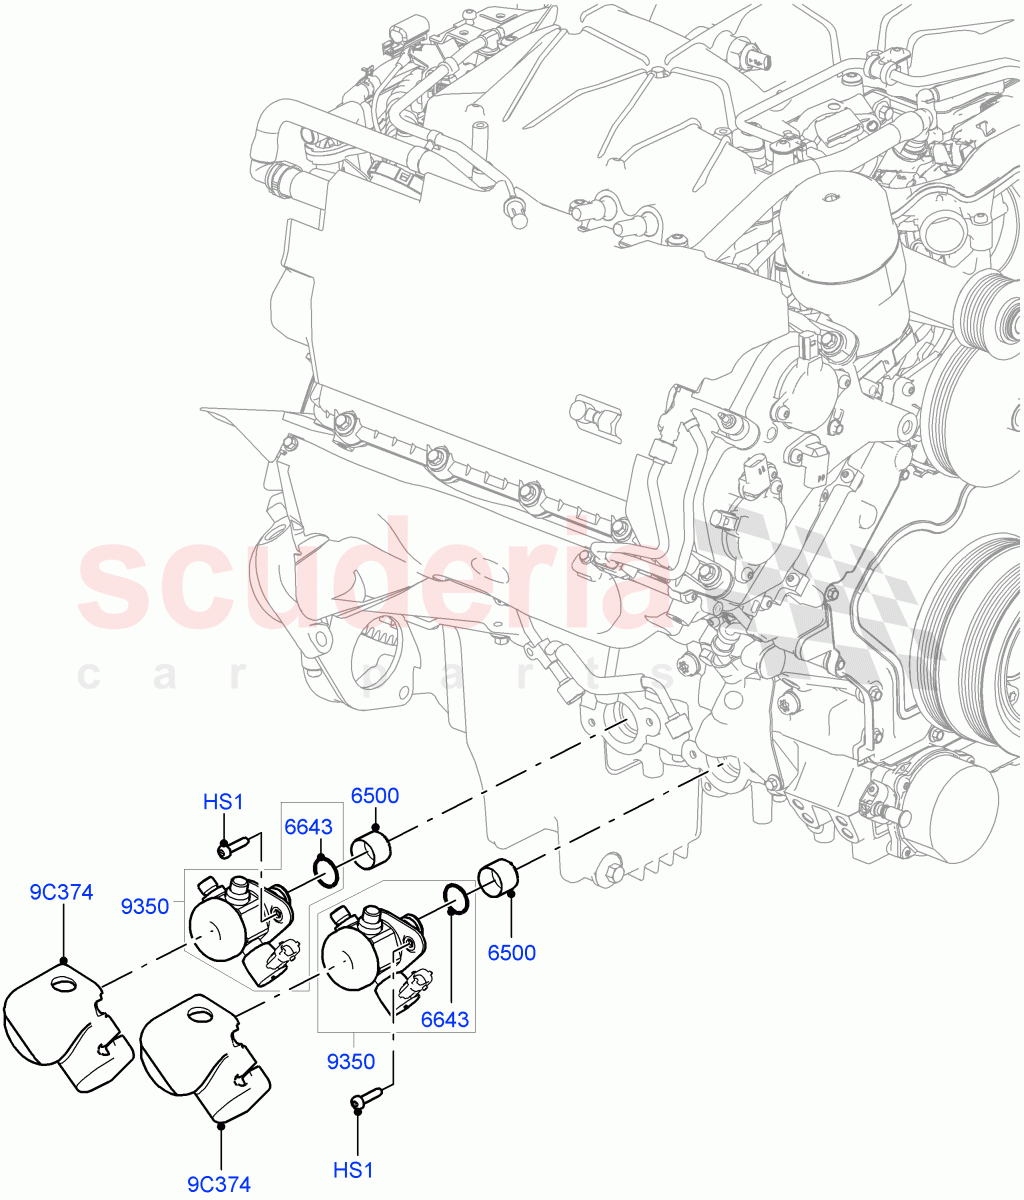 Fuel Injection Pump-Engine Mounted(Solihull Plant Build)(3.0L DOHC GDI SC V6 PETROL)((V)FROMEA000001) of Land Rover Land Rover Range Rover (2012-2021) [3.0 DOHC GDI SC V6 Petrol]